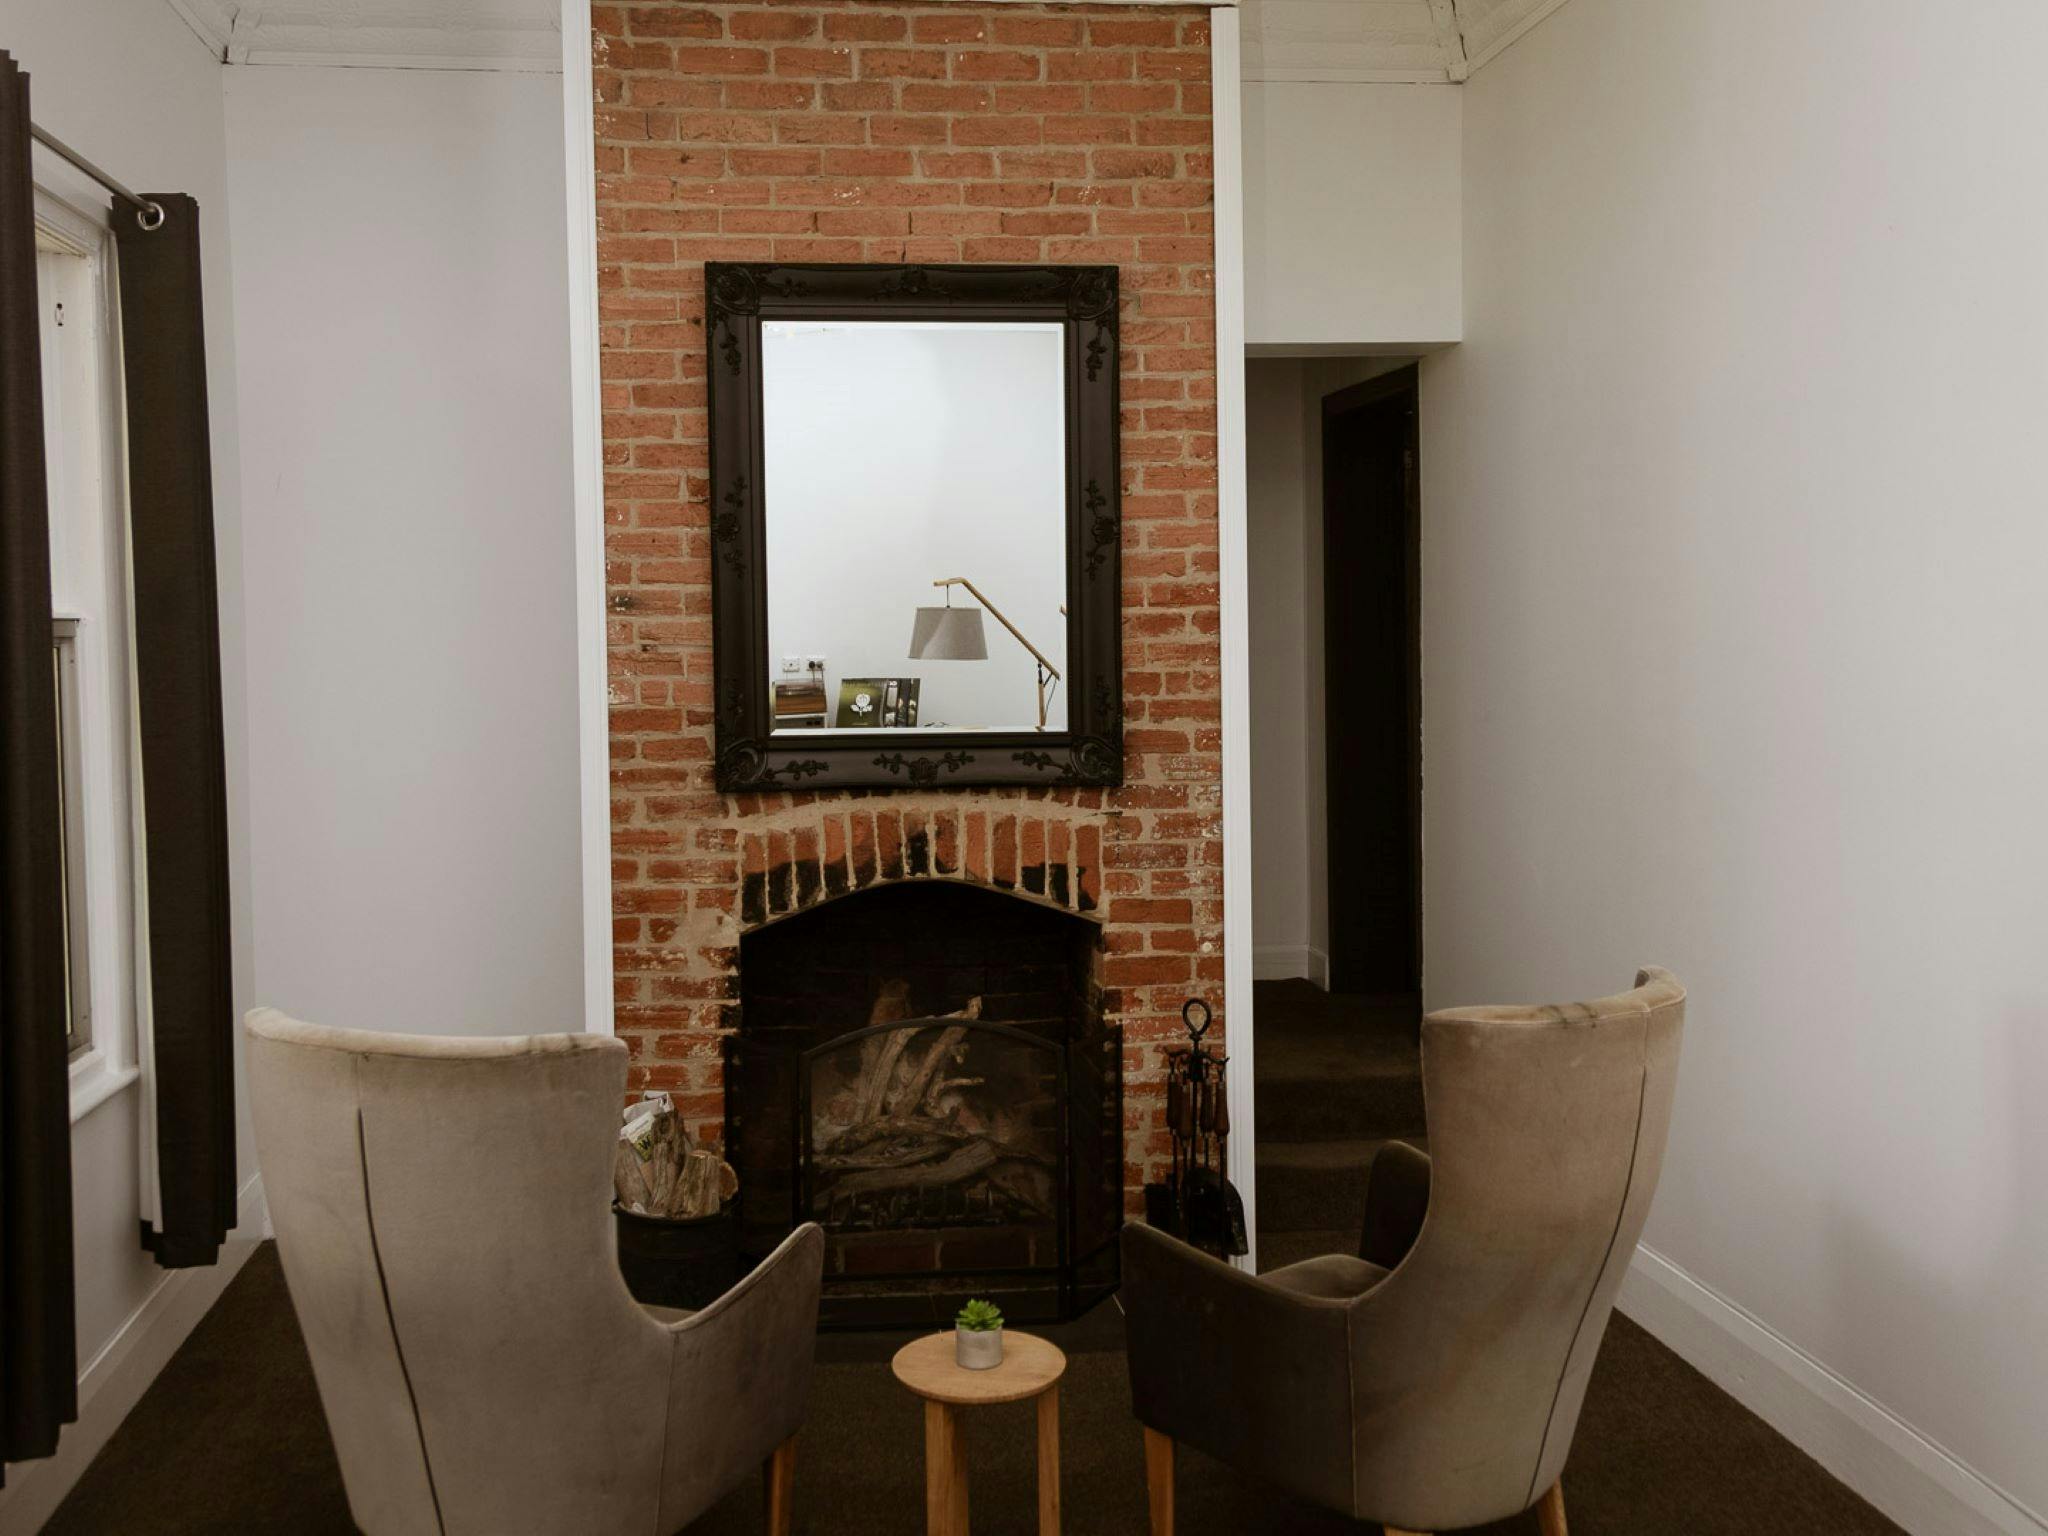 The formal lounge boasts an original open fireplace, a record player and pressed tin ceilings.